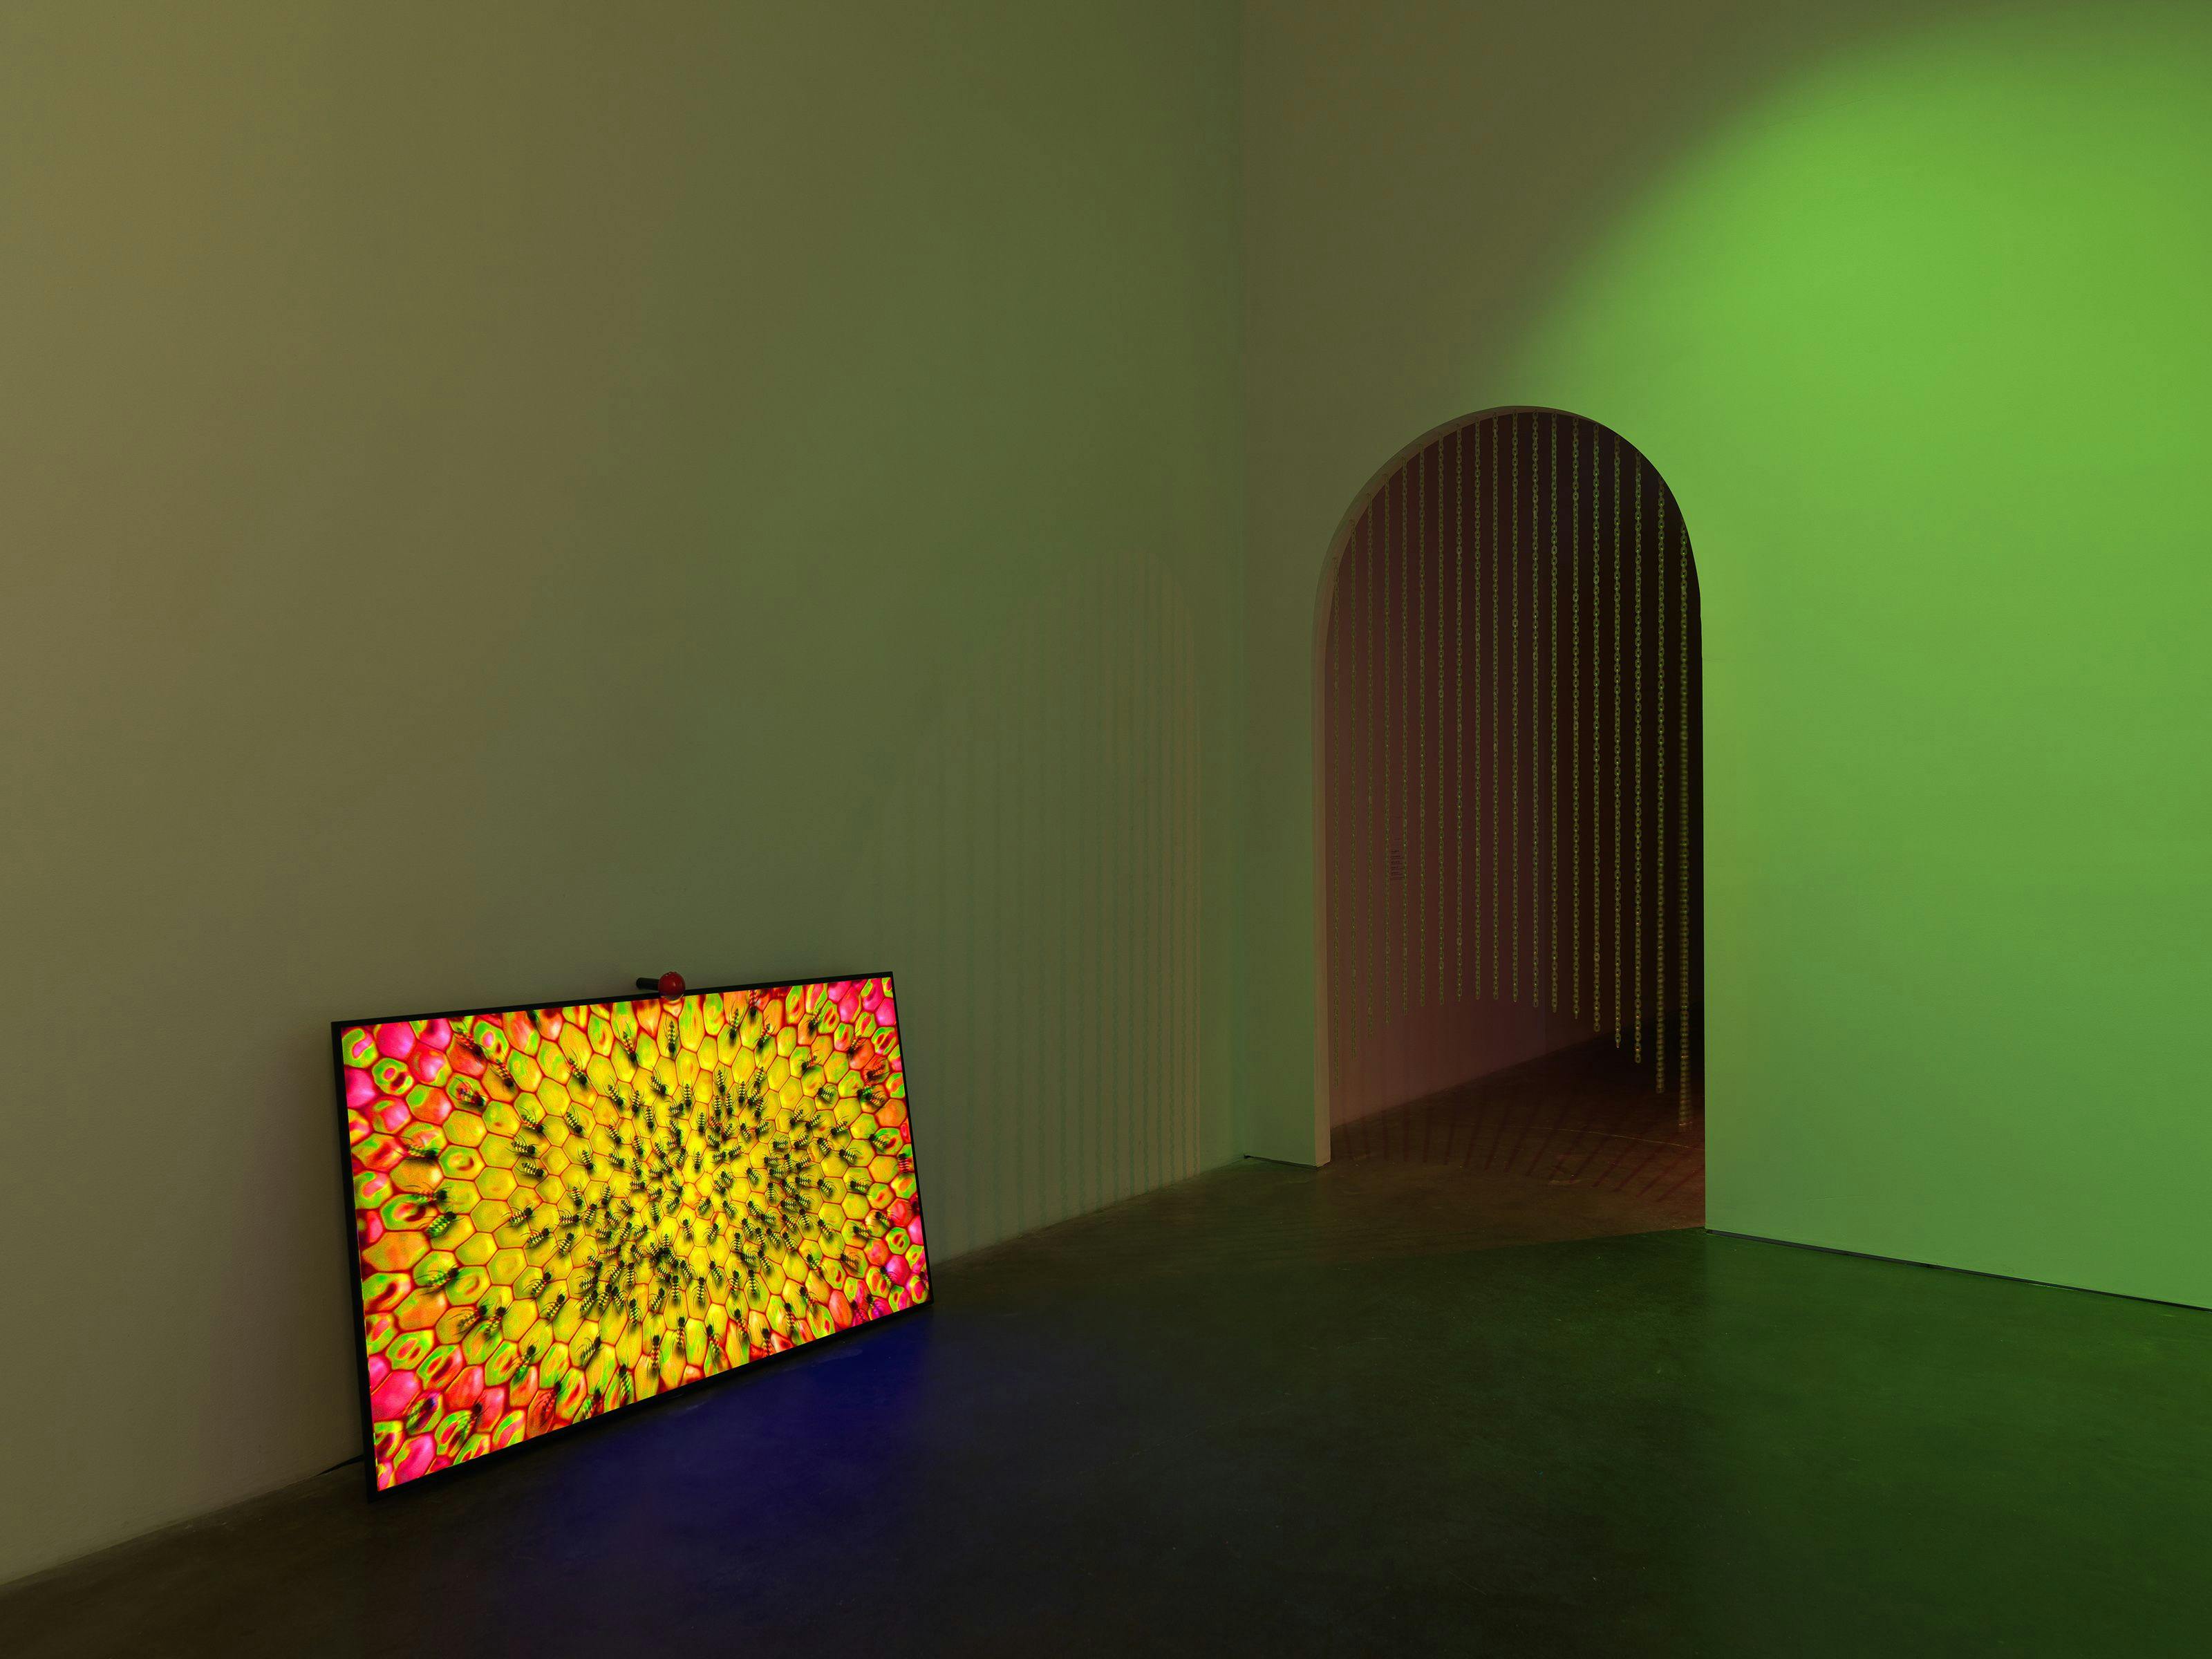 Image of a large TV screen leaning against a wall with an image on it. The TV is set in a green lit gallery space with an archway in the wall.